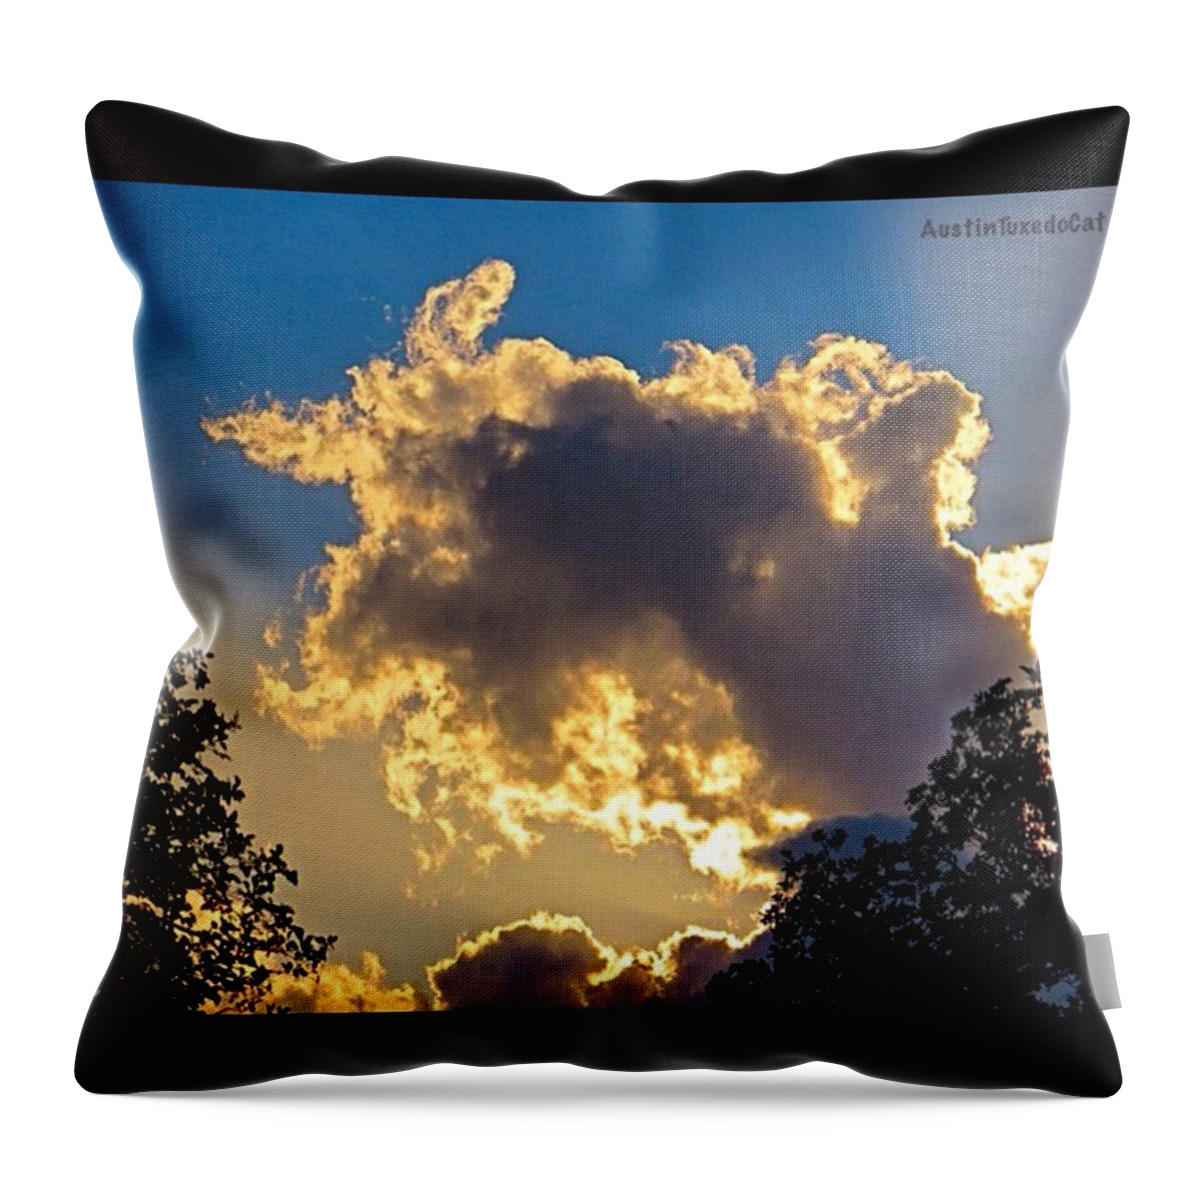 Keepaustinweird Throw Pillow featuring the photograph Someone In #austin Got Lots Of #rain. I by Austin Tuxedo Cat